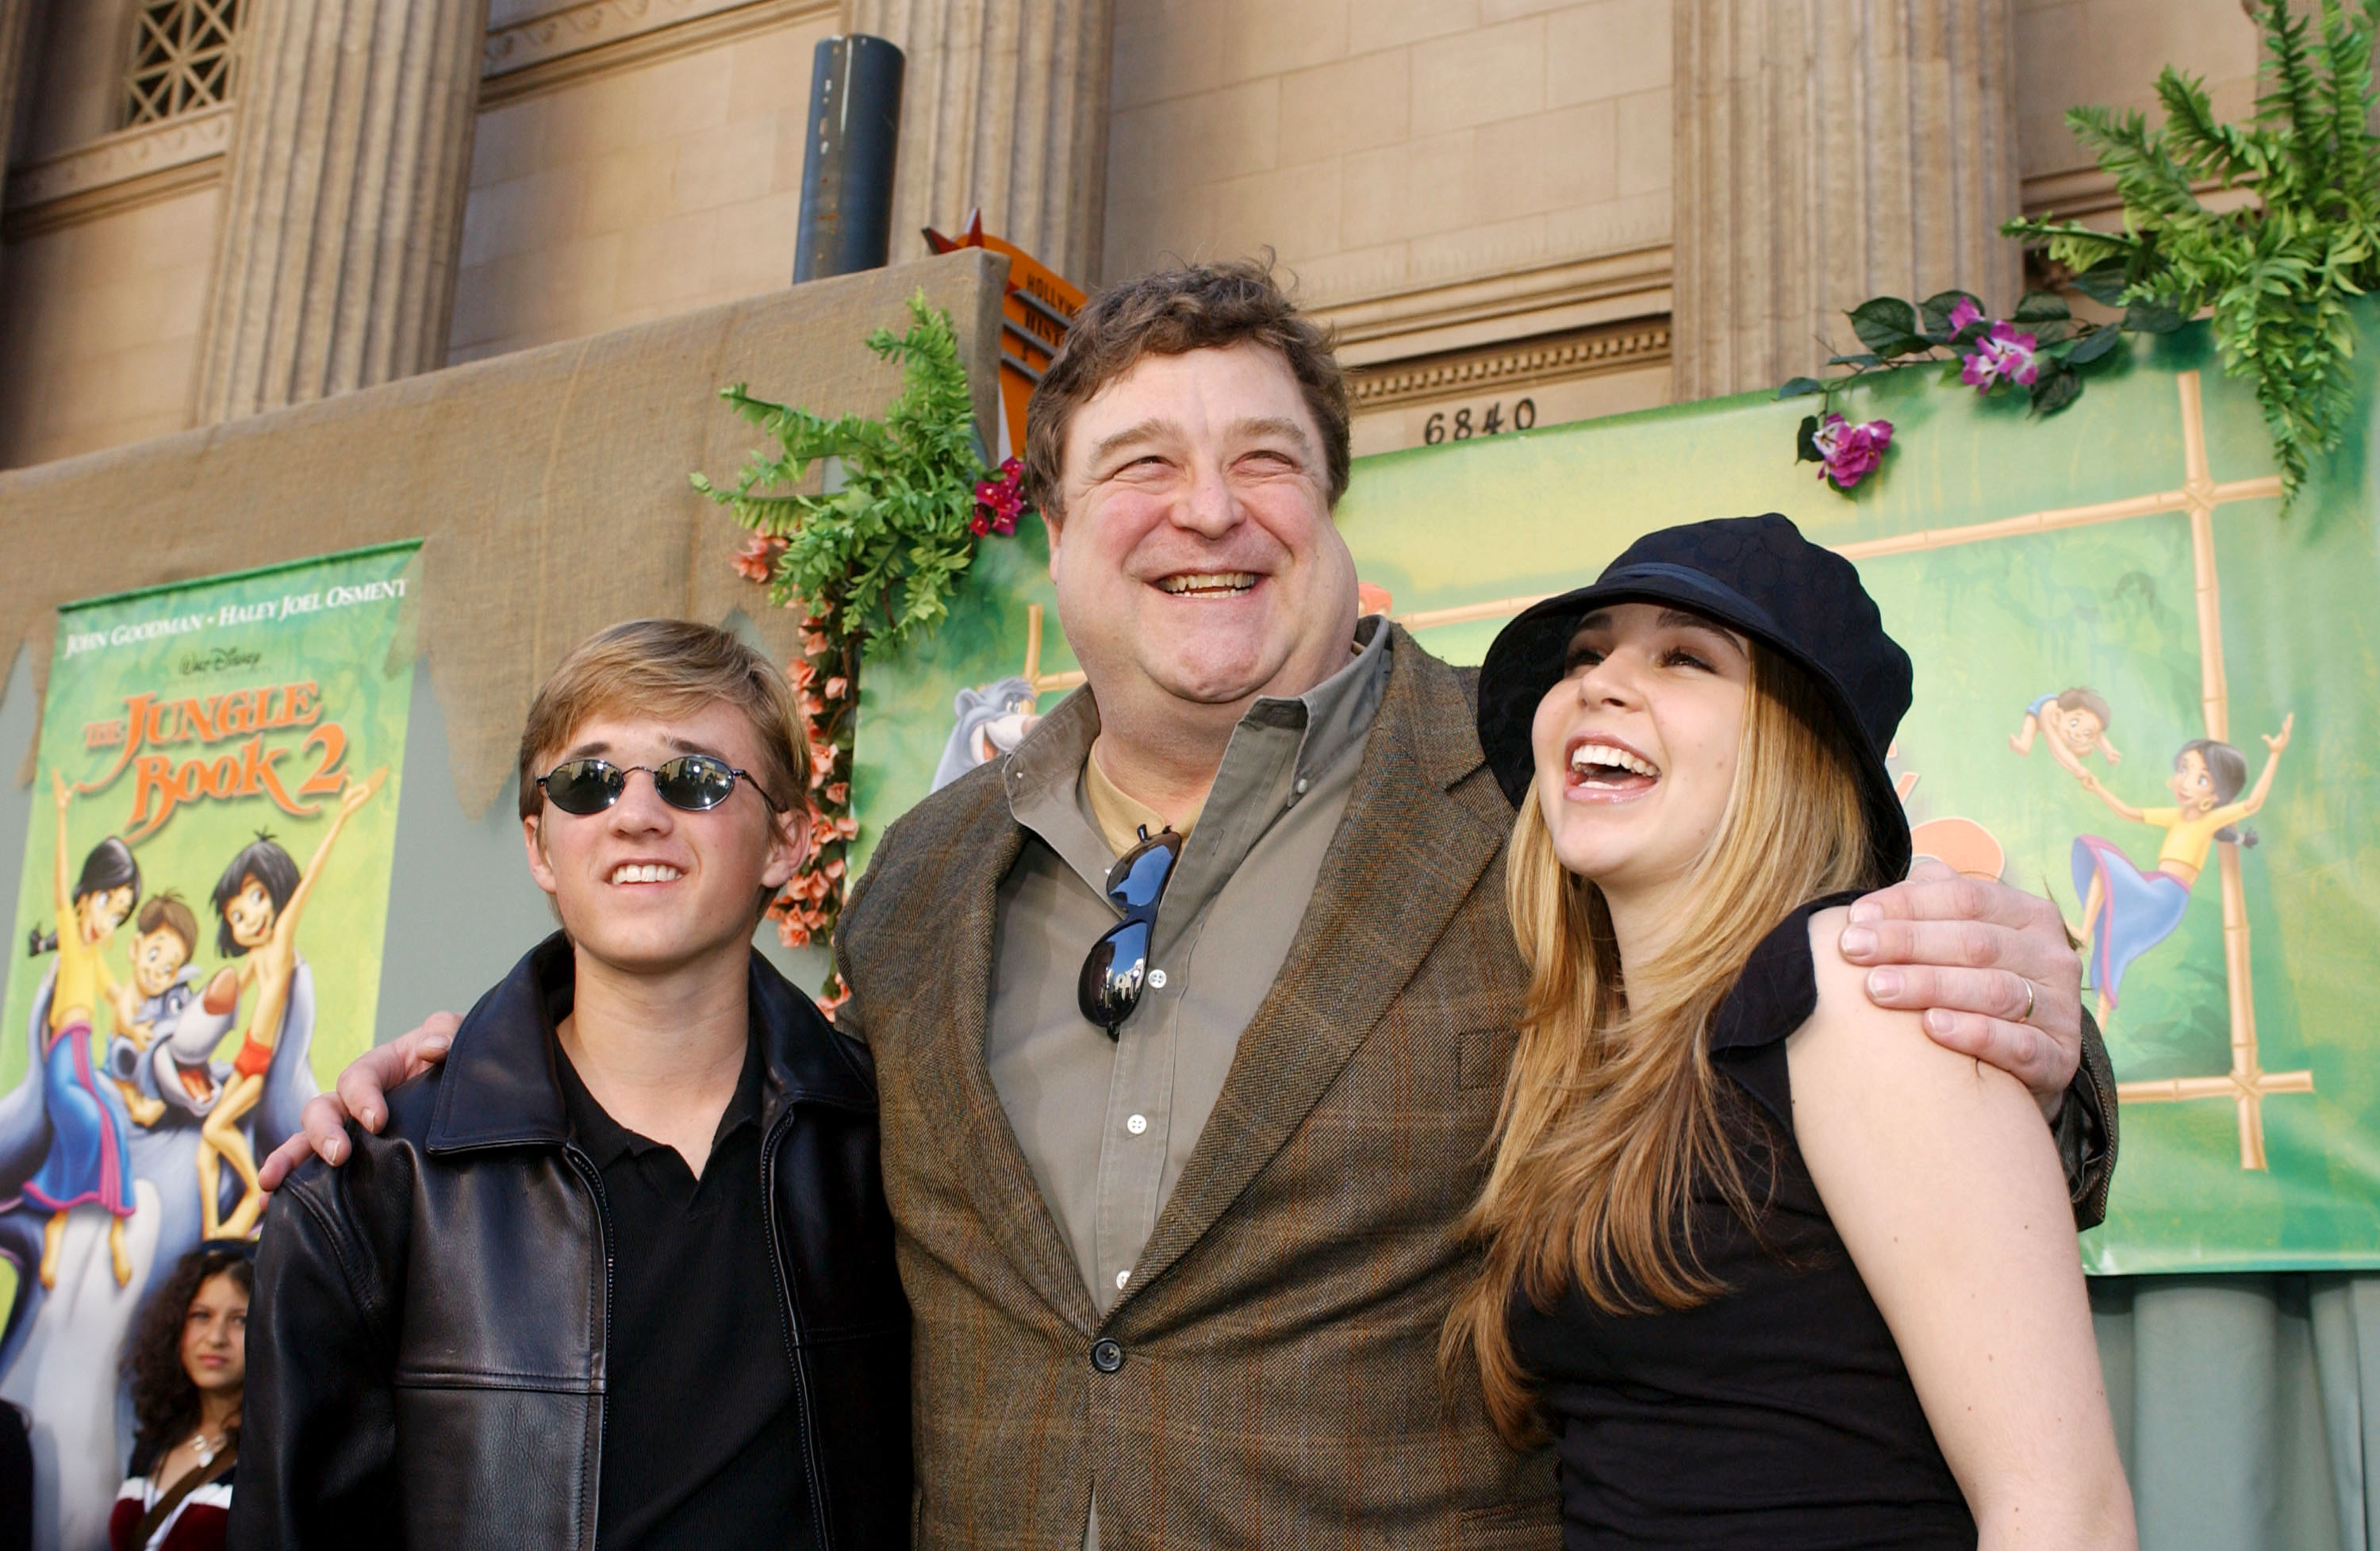 Haley Osment, John Goodman and Mae Whitman at the premiere of "The Jungle Book 2,"  2003 | Source: Getty Images